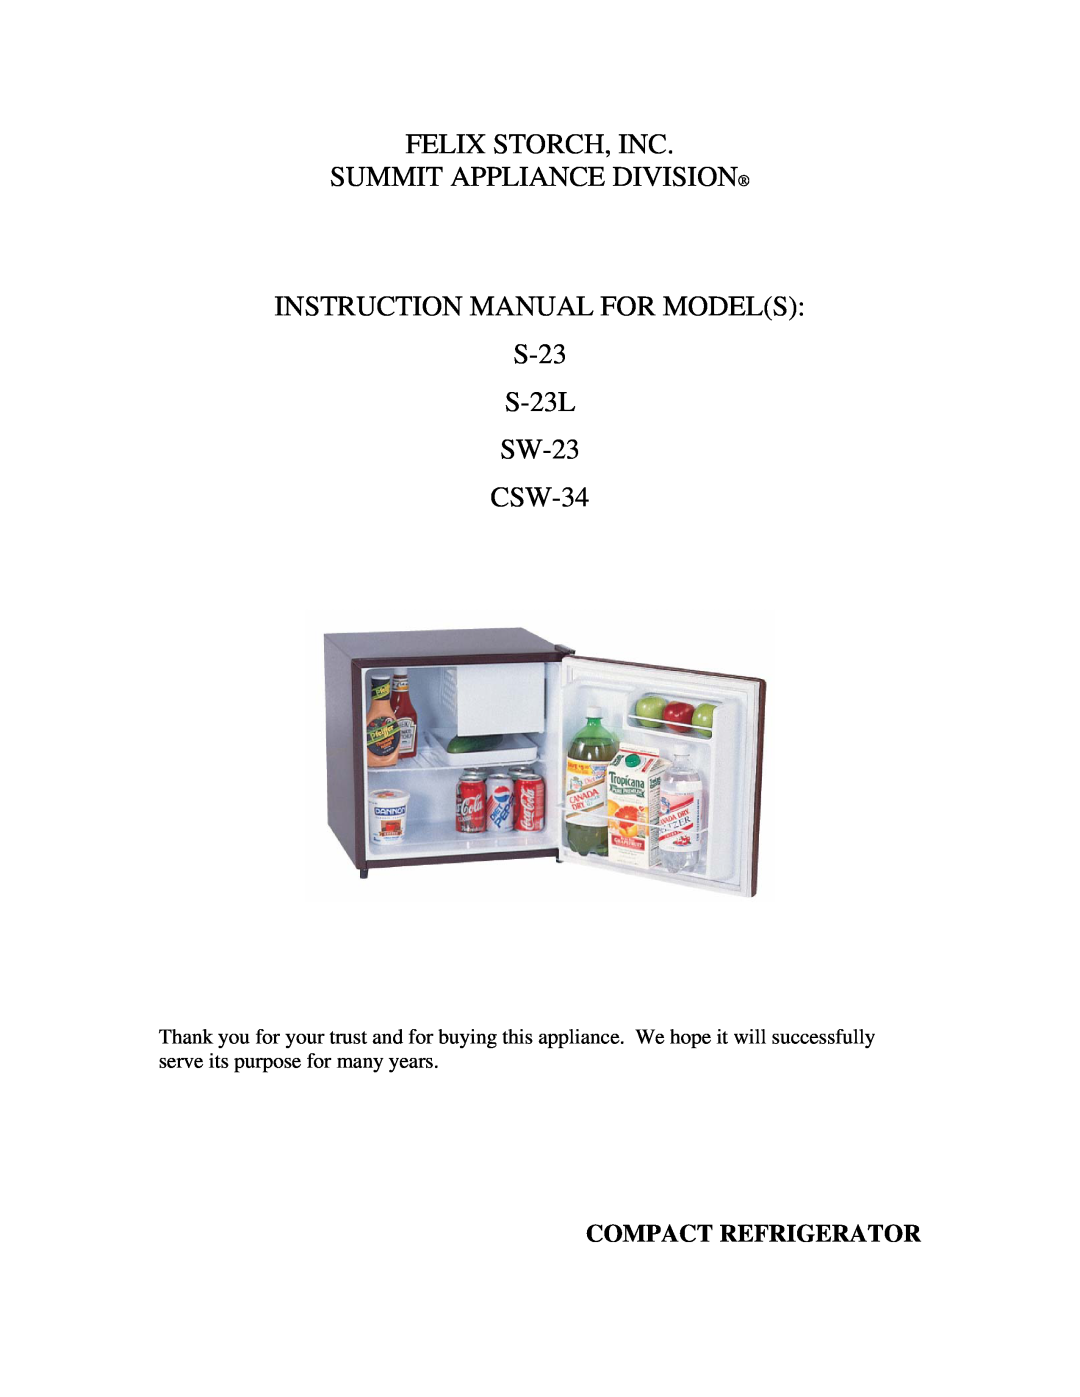 Summit SW-23, S-23L instruction manual Compact Refrigerator, Felix Storch, Inc Summit Appliance Division, CSW-34 